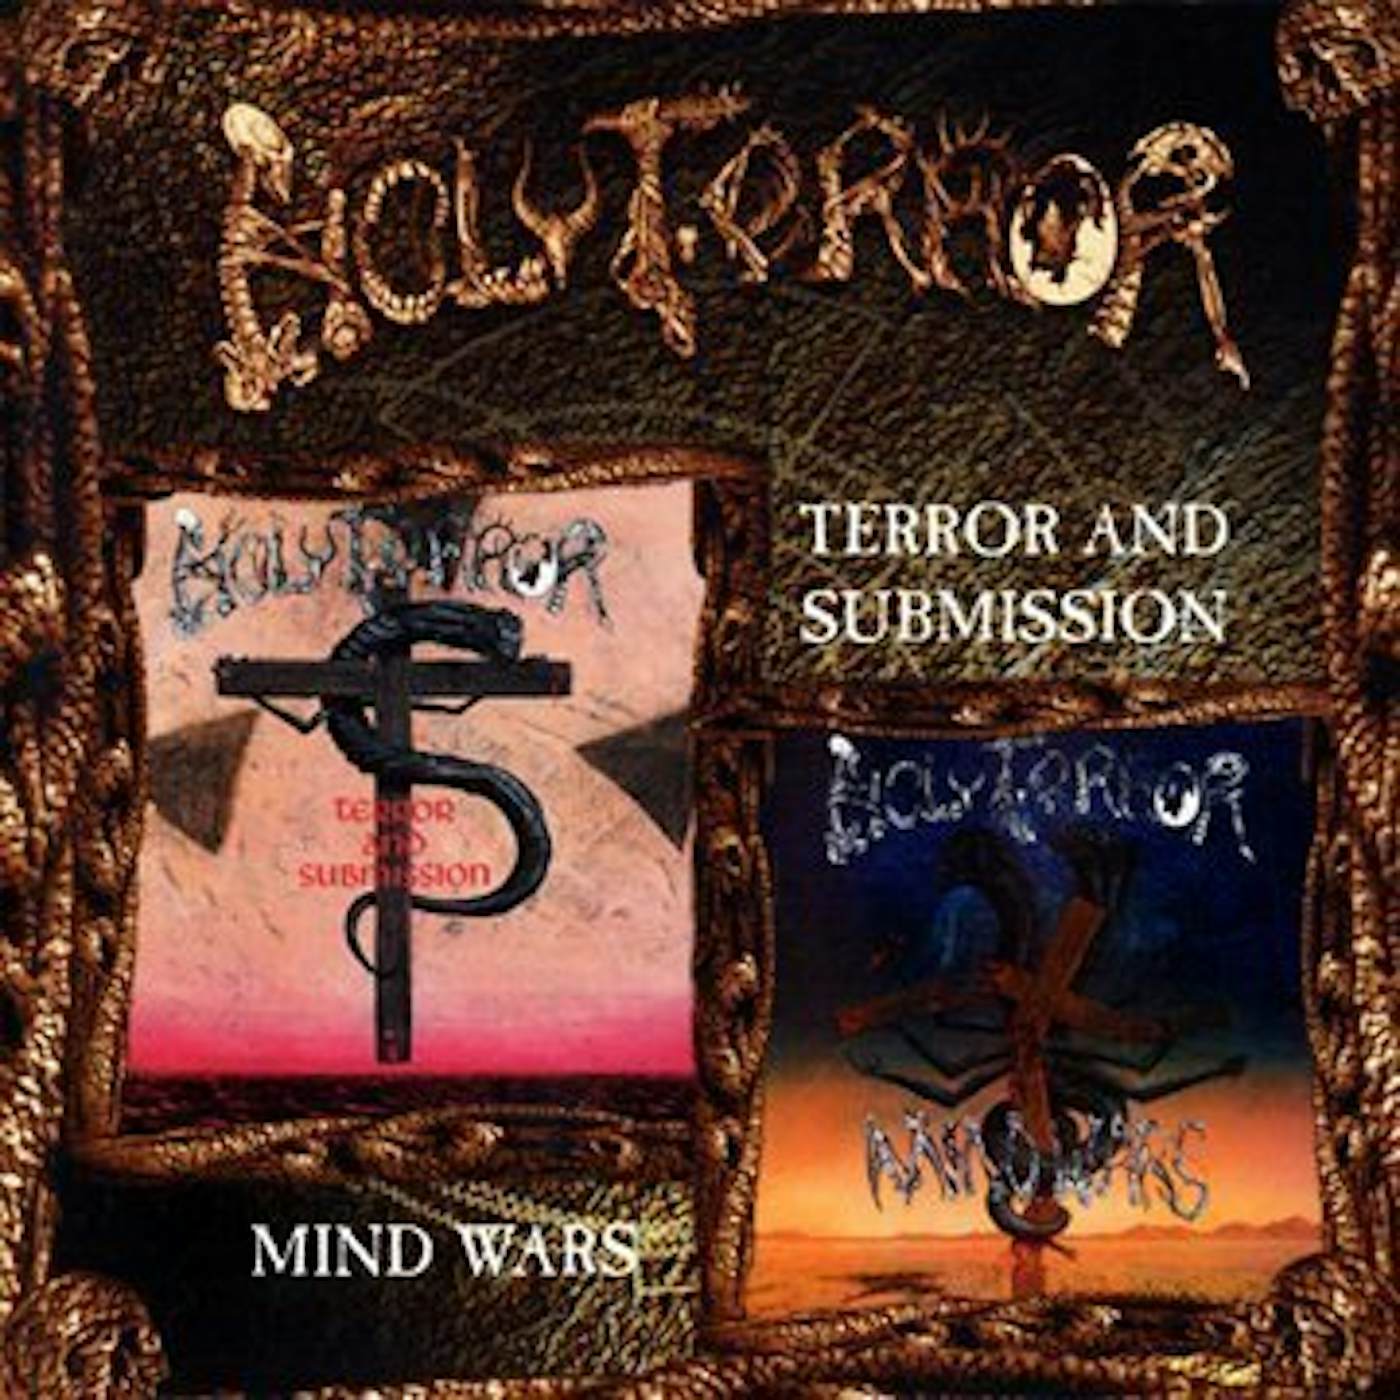 Holy Terror Terror And Submission Vinyl Record